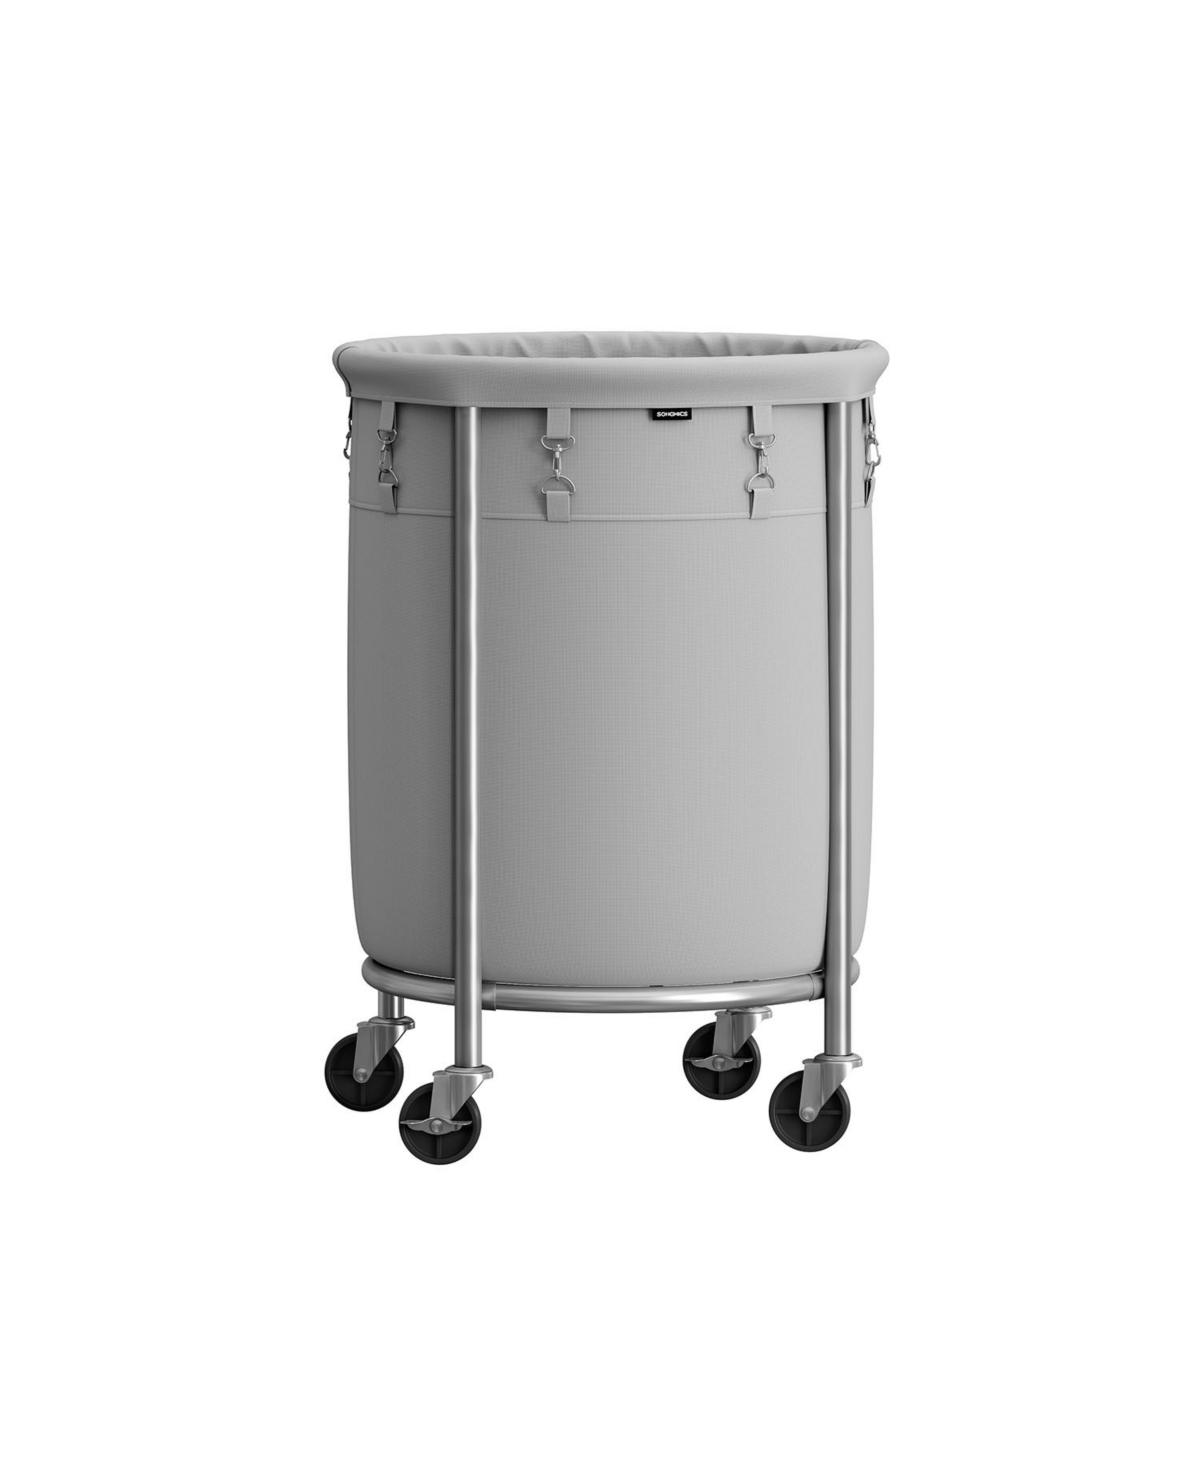 Laundry Basket With Wheels, Rolling Laundry Hamper, Round Laundry Cart With Steel Frame - Grey